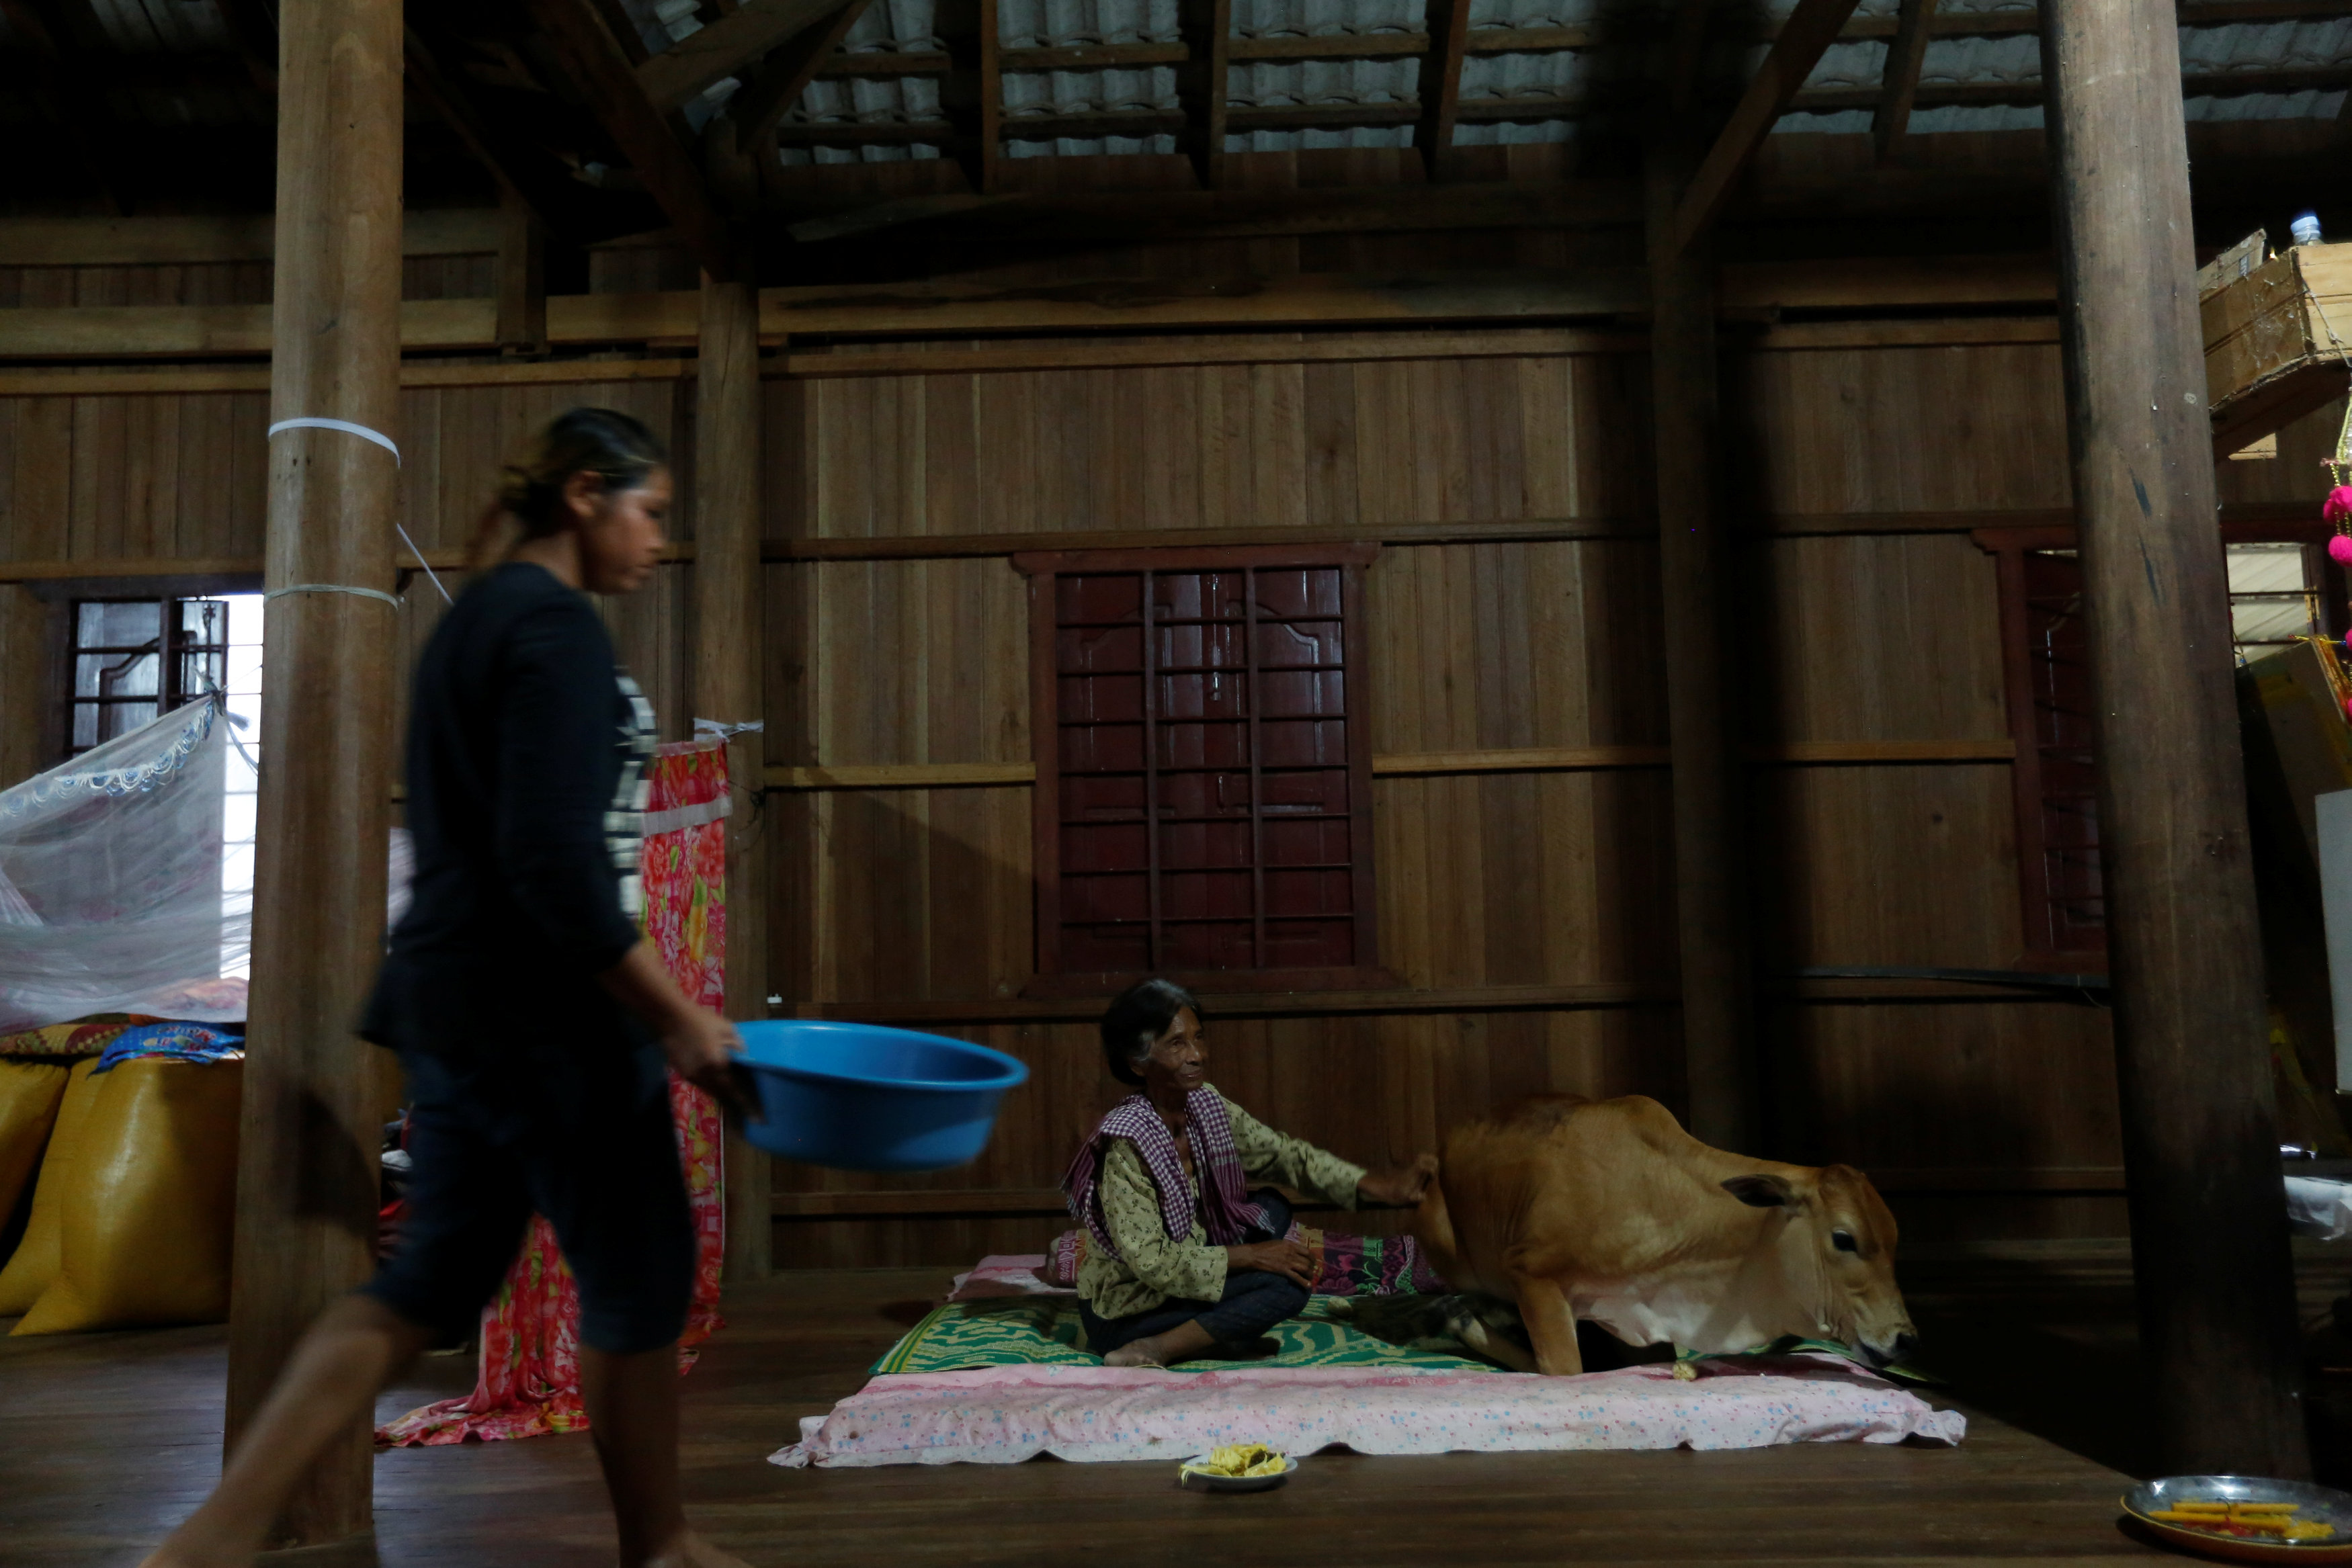 Khim Hang, 74, sits in her bedroom with a cow which she believes is her reborn husband in Kratie province, Cambodia, July 18, 2017. REUTERS/Samrang Pring